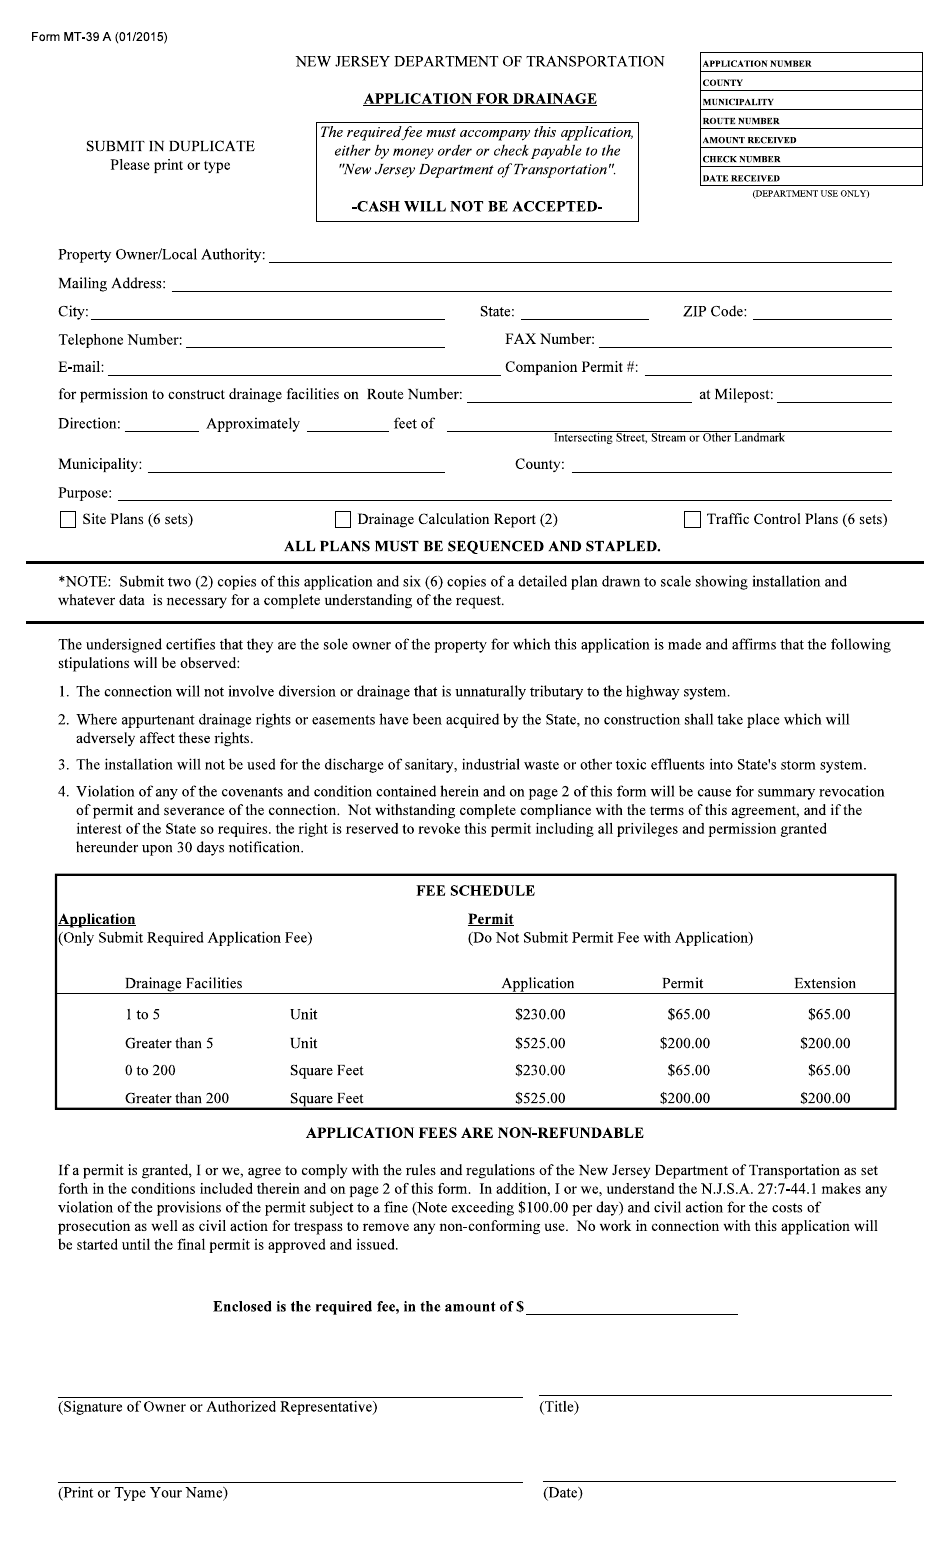 Form MT-39 A Application for Drainage - New Jersey, Page 1